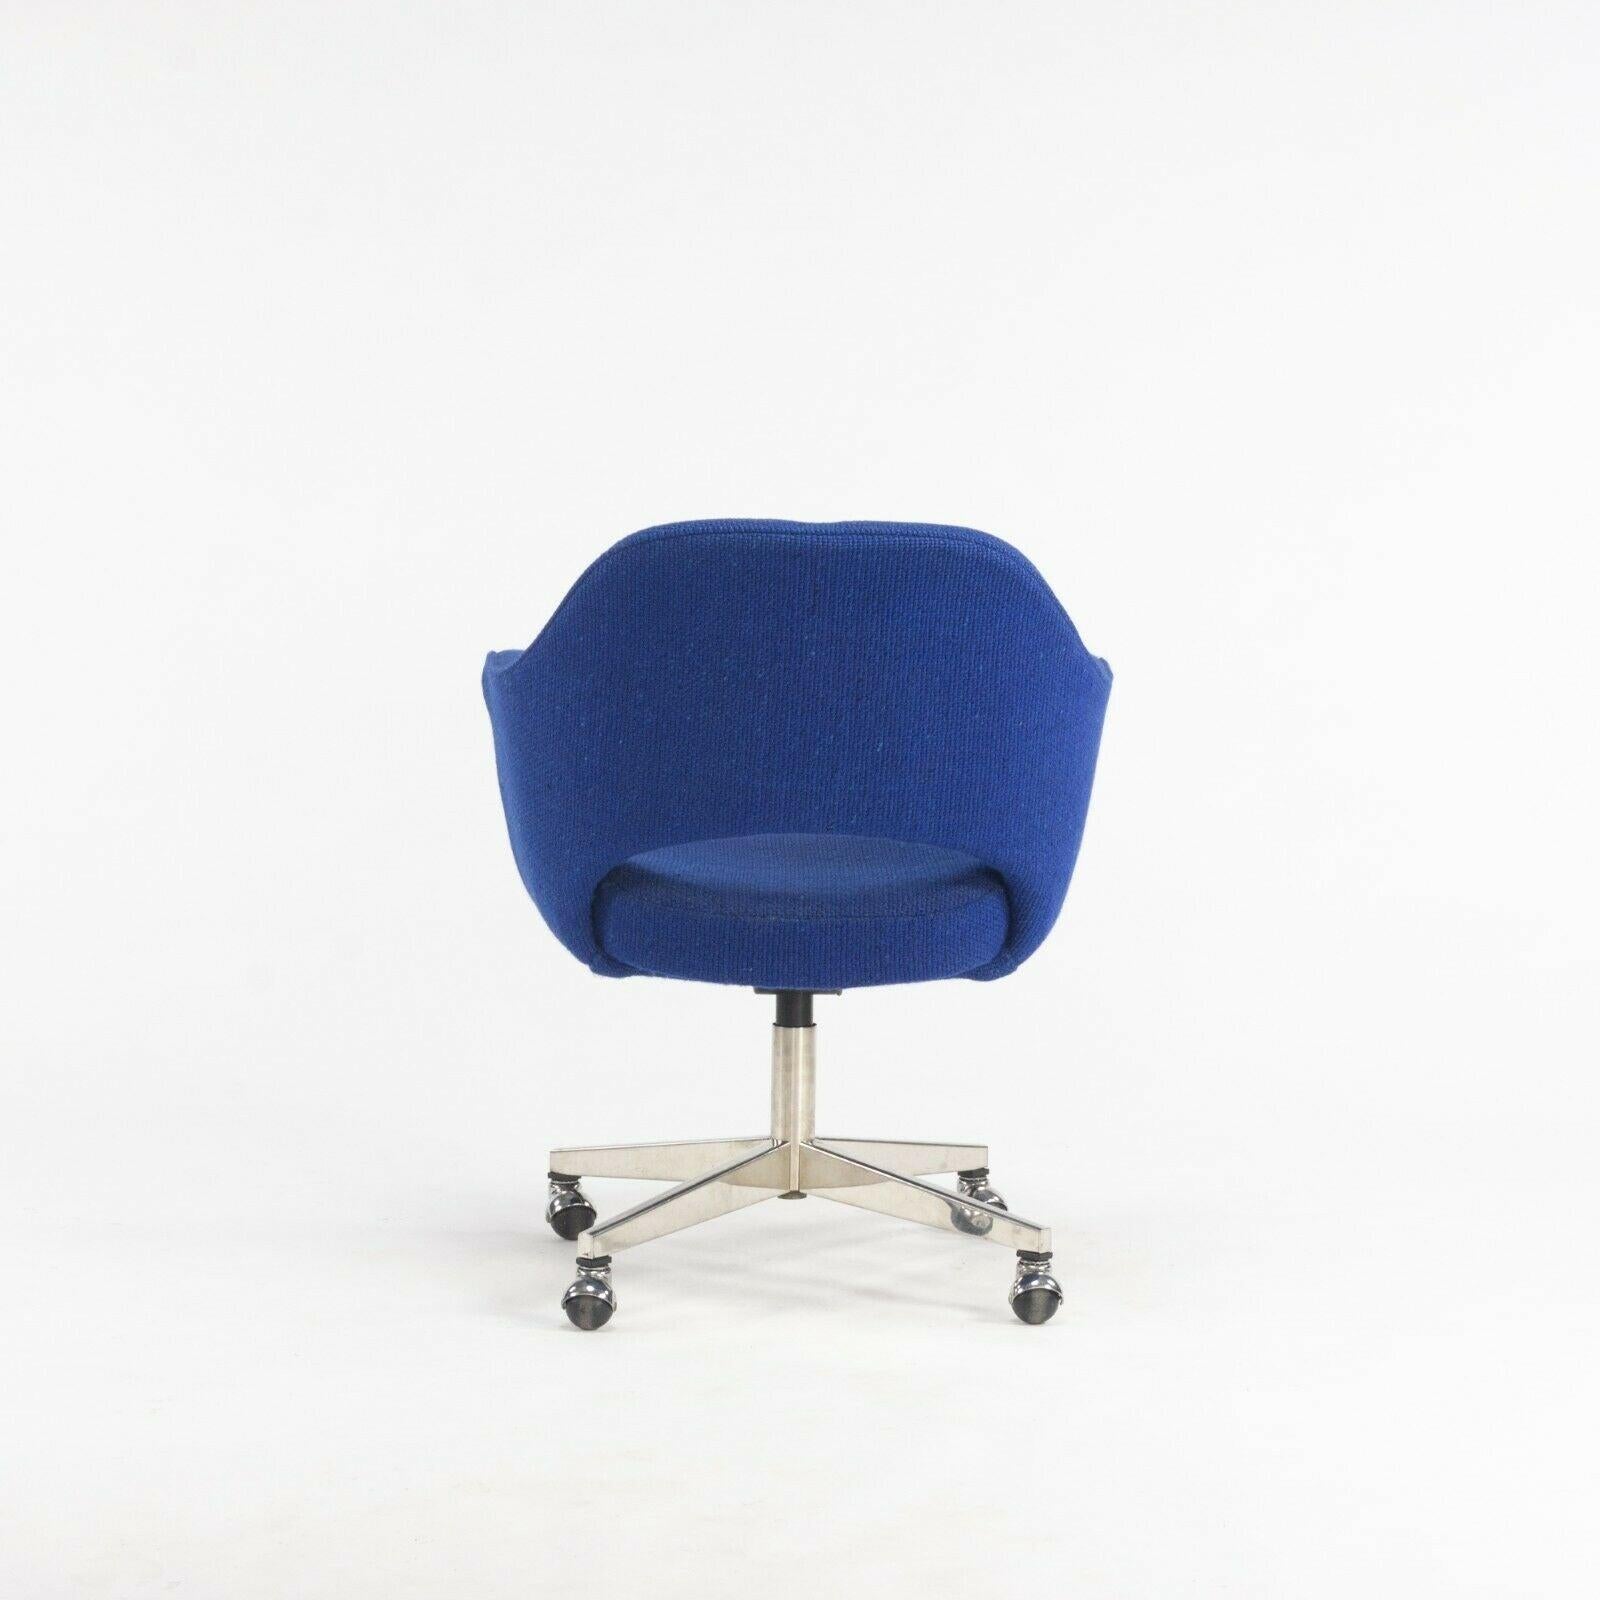 1974 Eero Saarinen for Knoll Rolling Executive Office Chair Original Blue Fabric In Good Condition For Sale In Philadelphia, PA